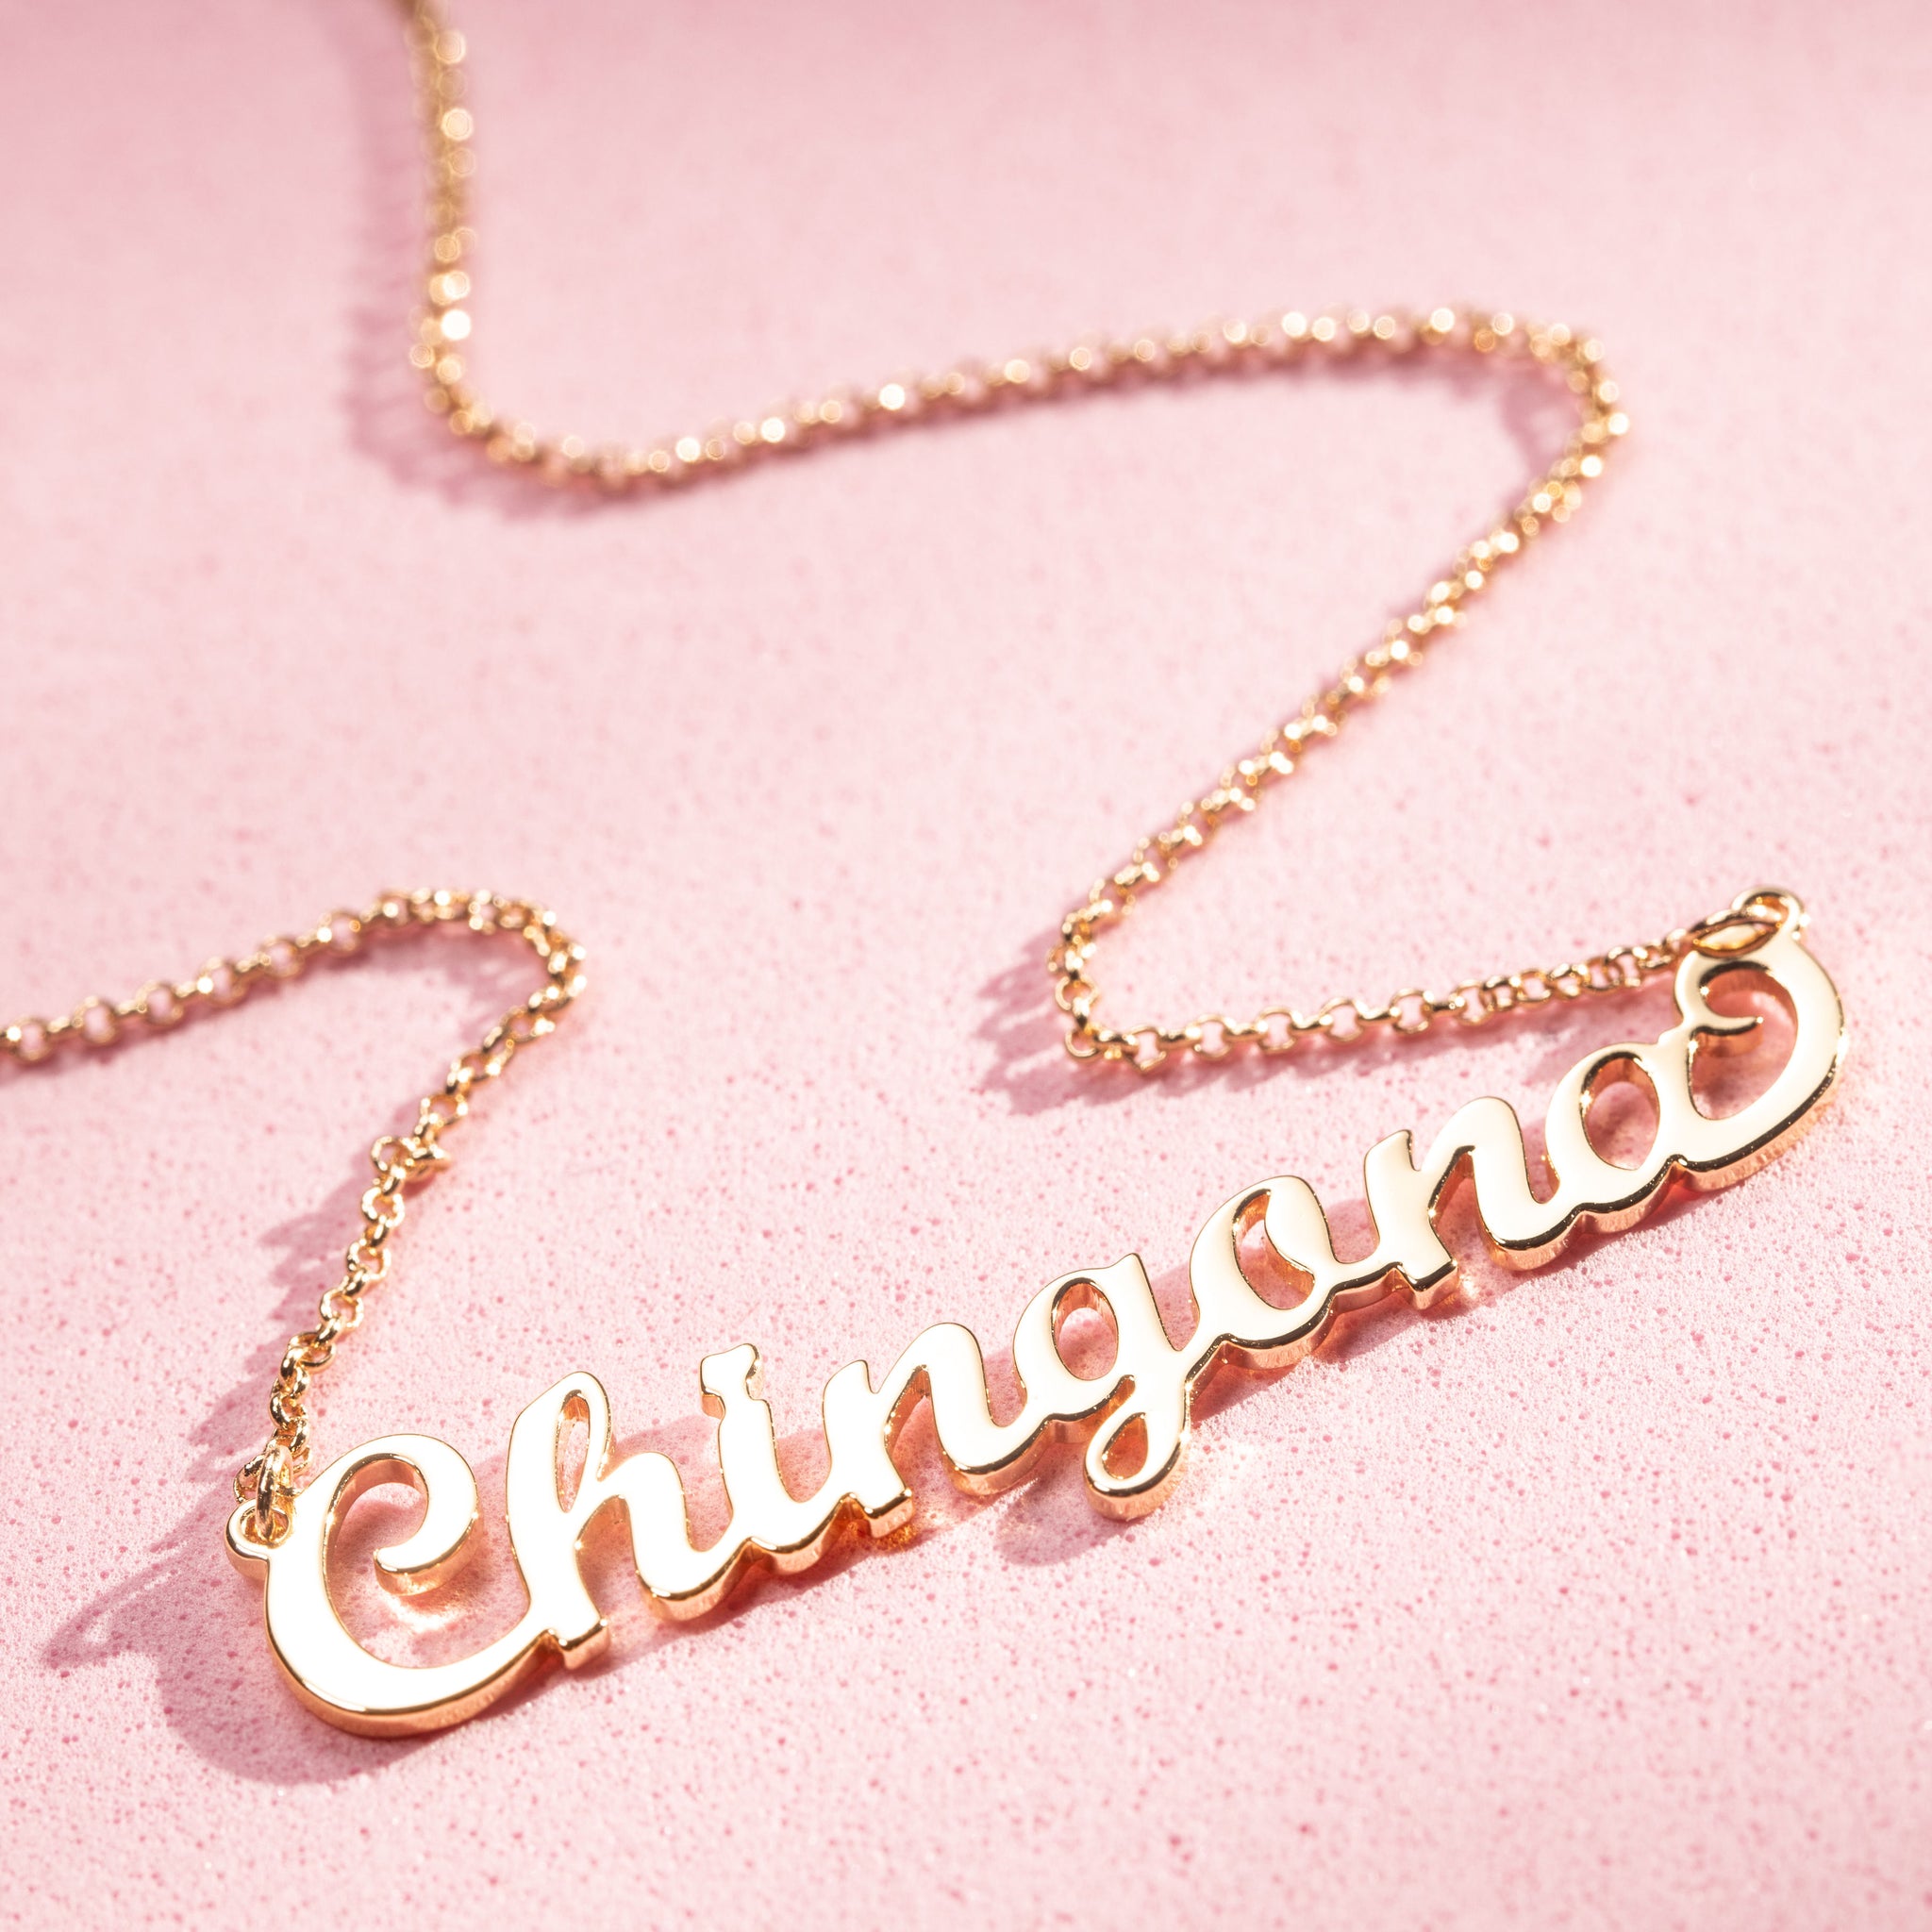 Gold-plated sterling silver necklace for women, showcasing strength and style with the word 'Chingona' written in elegant cursive script